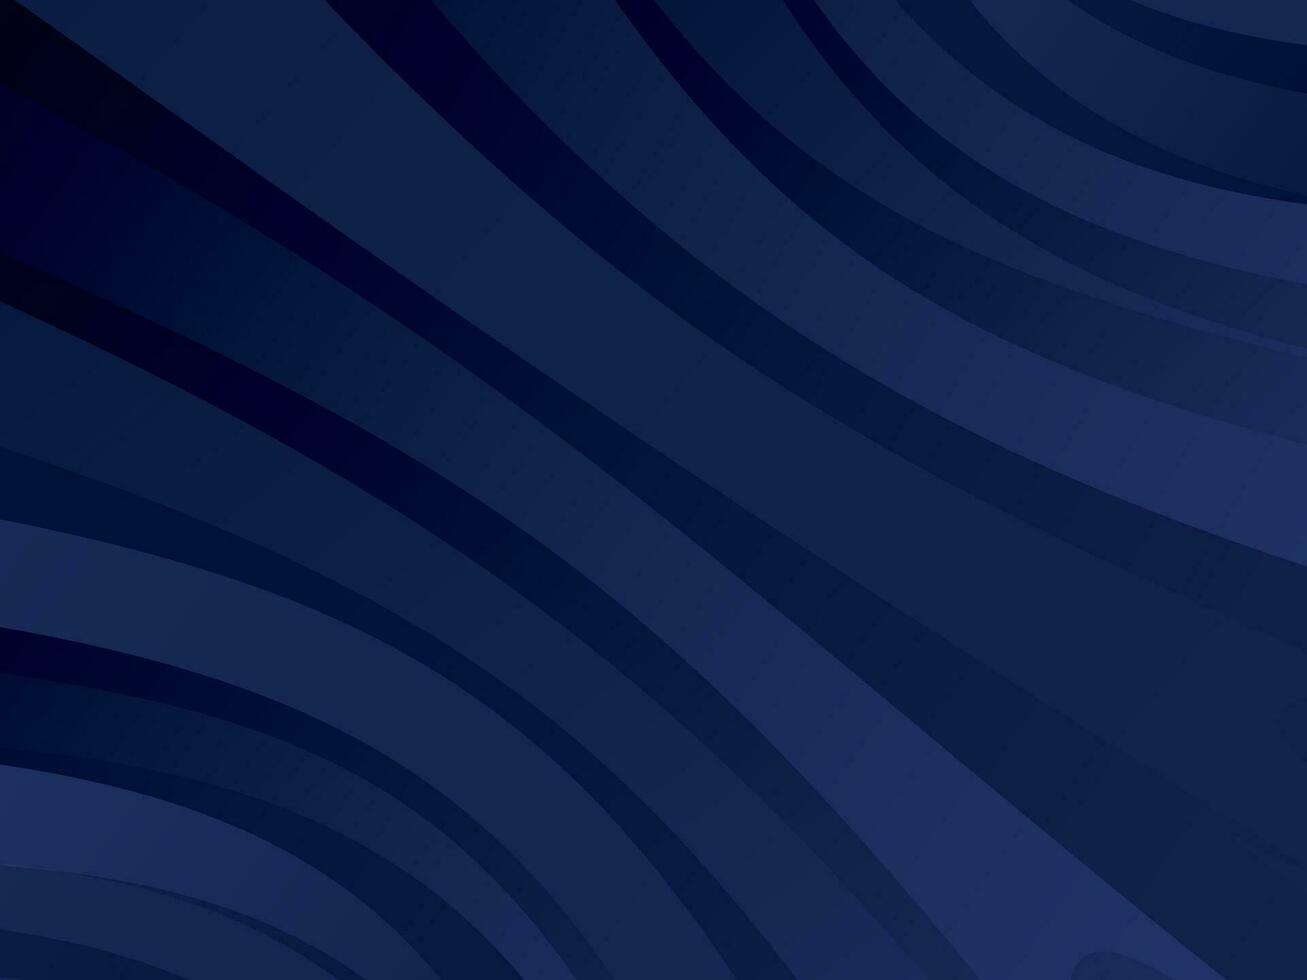 a dark blue background with wavy lines, Abstract dark blue background with lines. Vector illustration for your design.